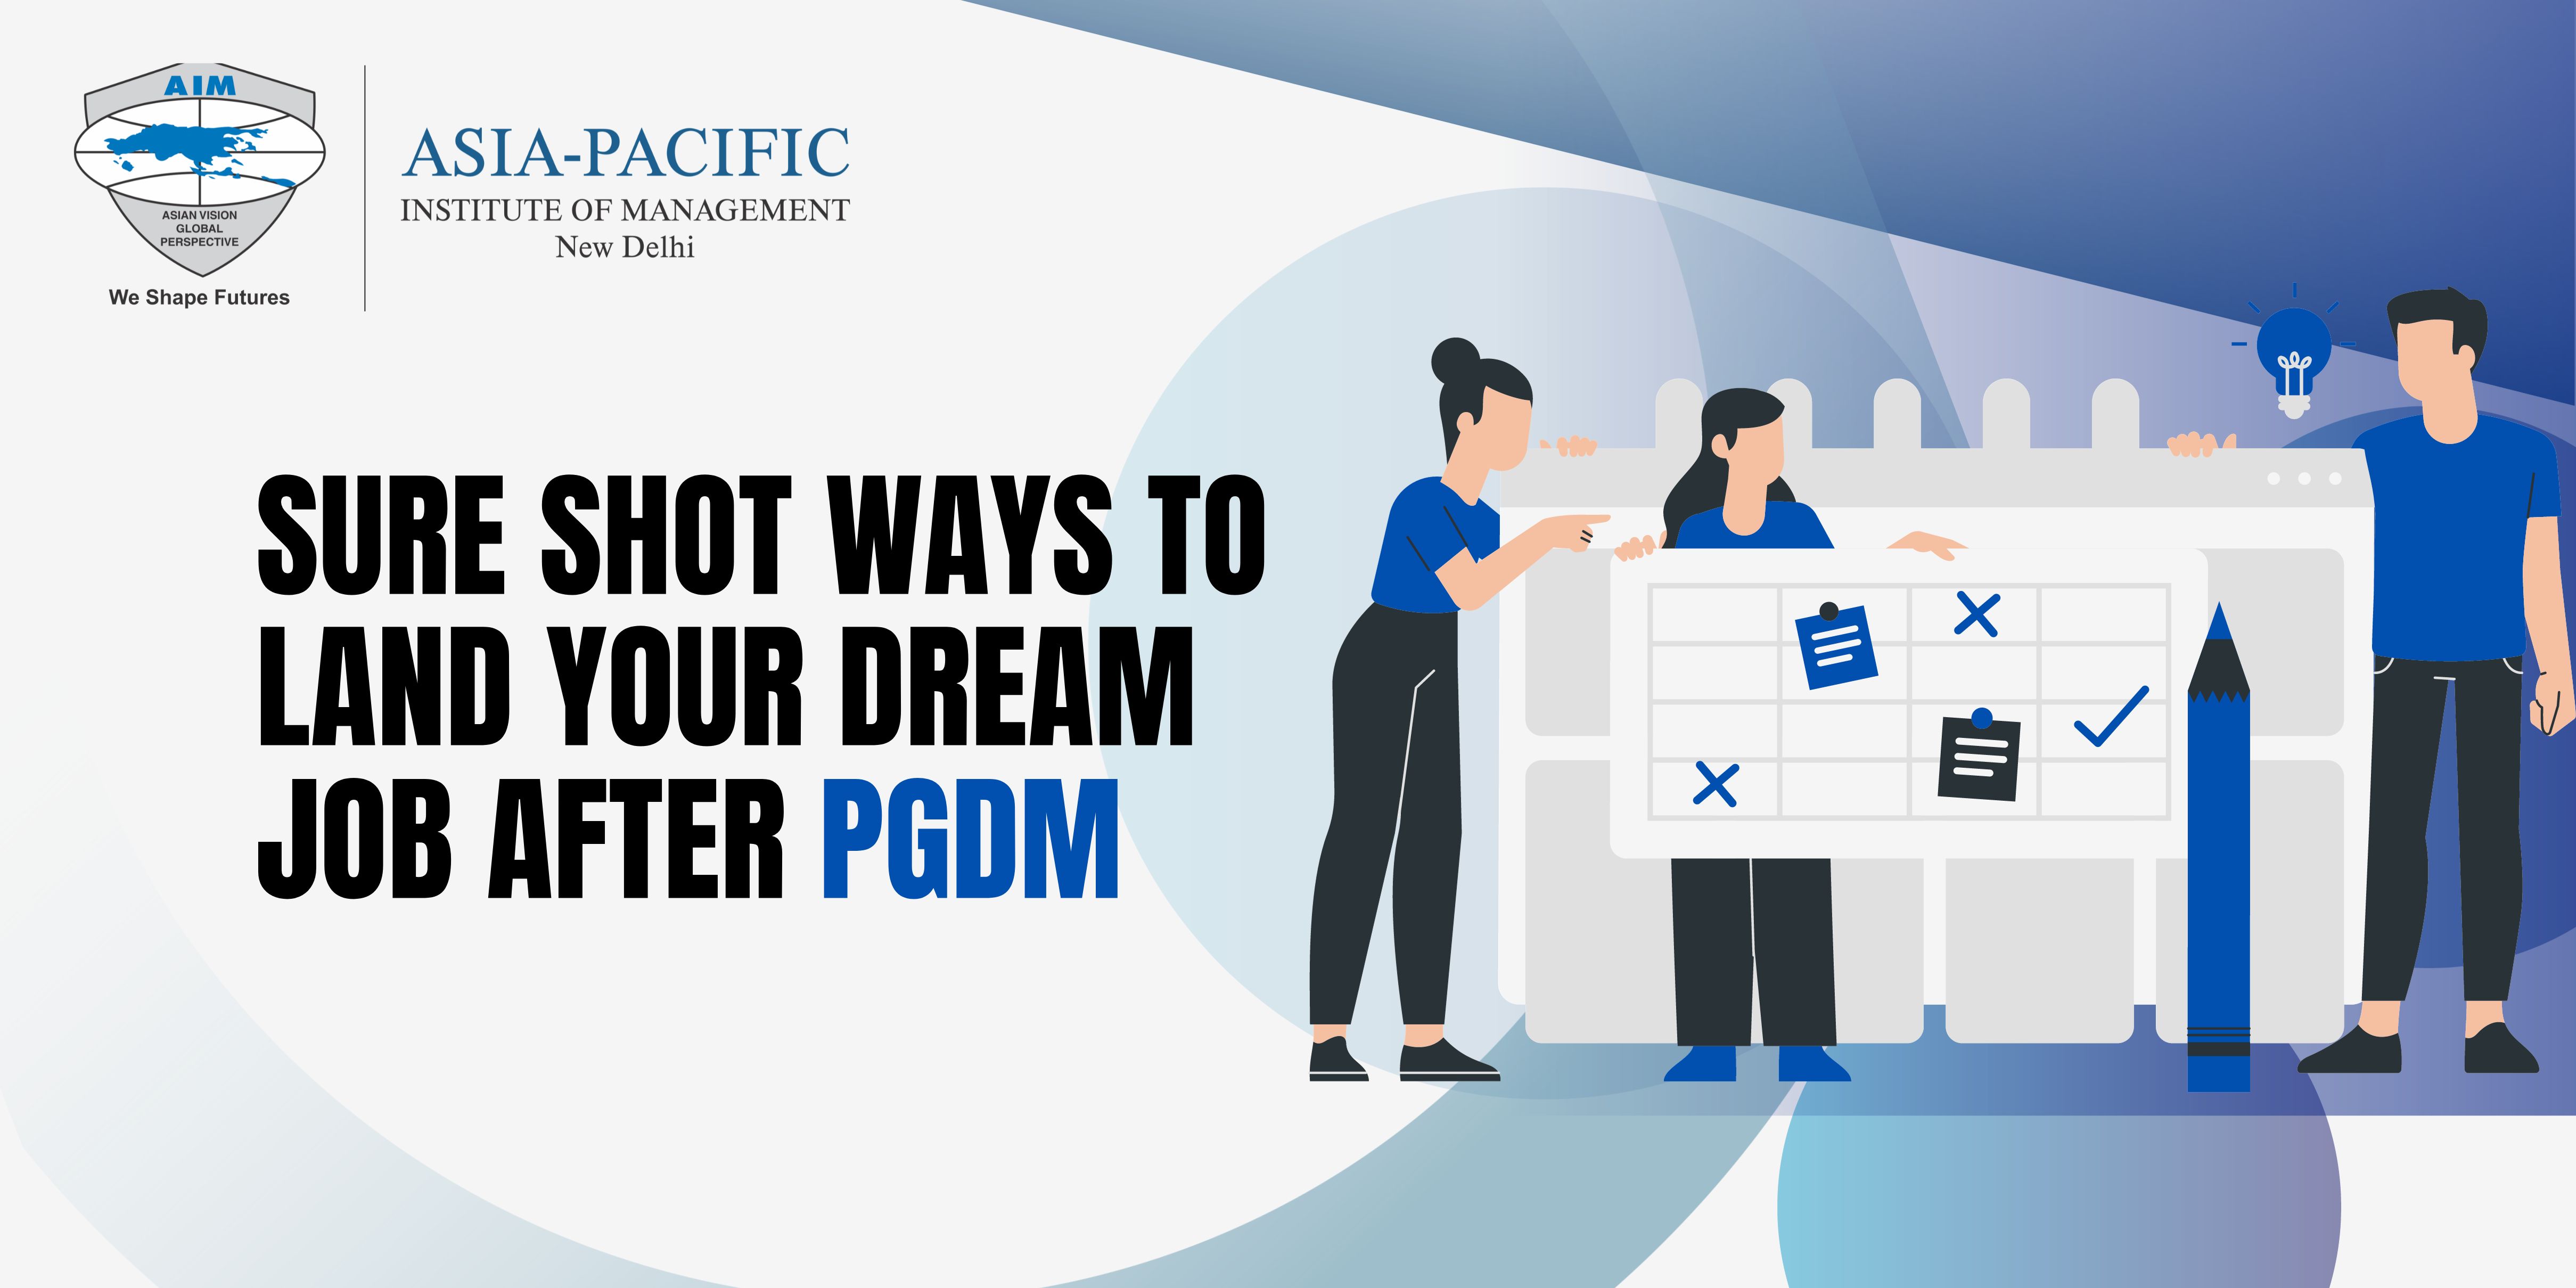 Your Dream Job After PGDM